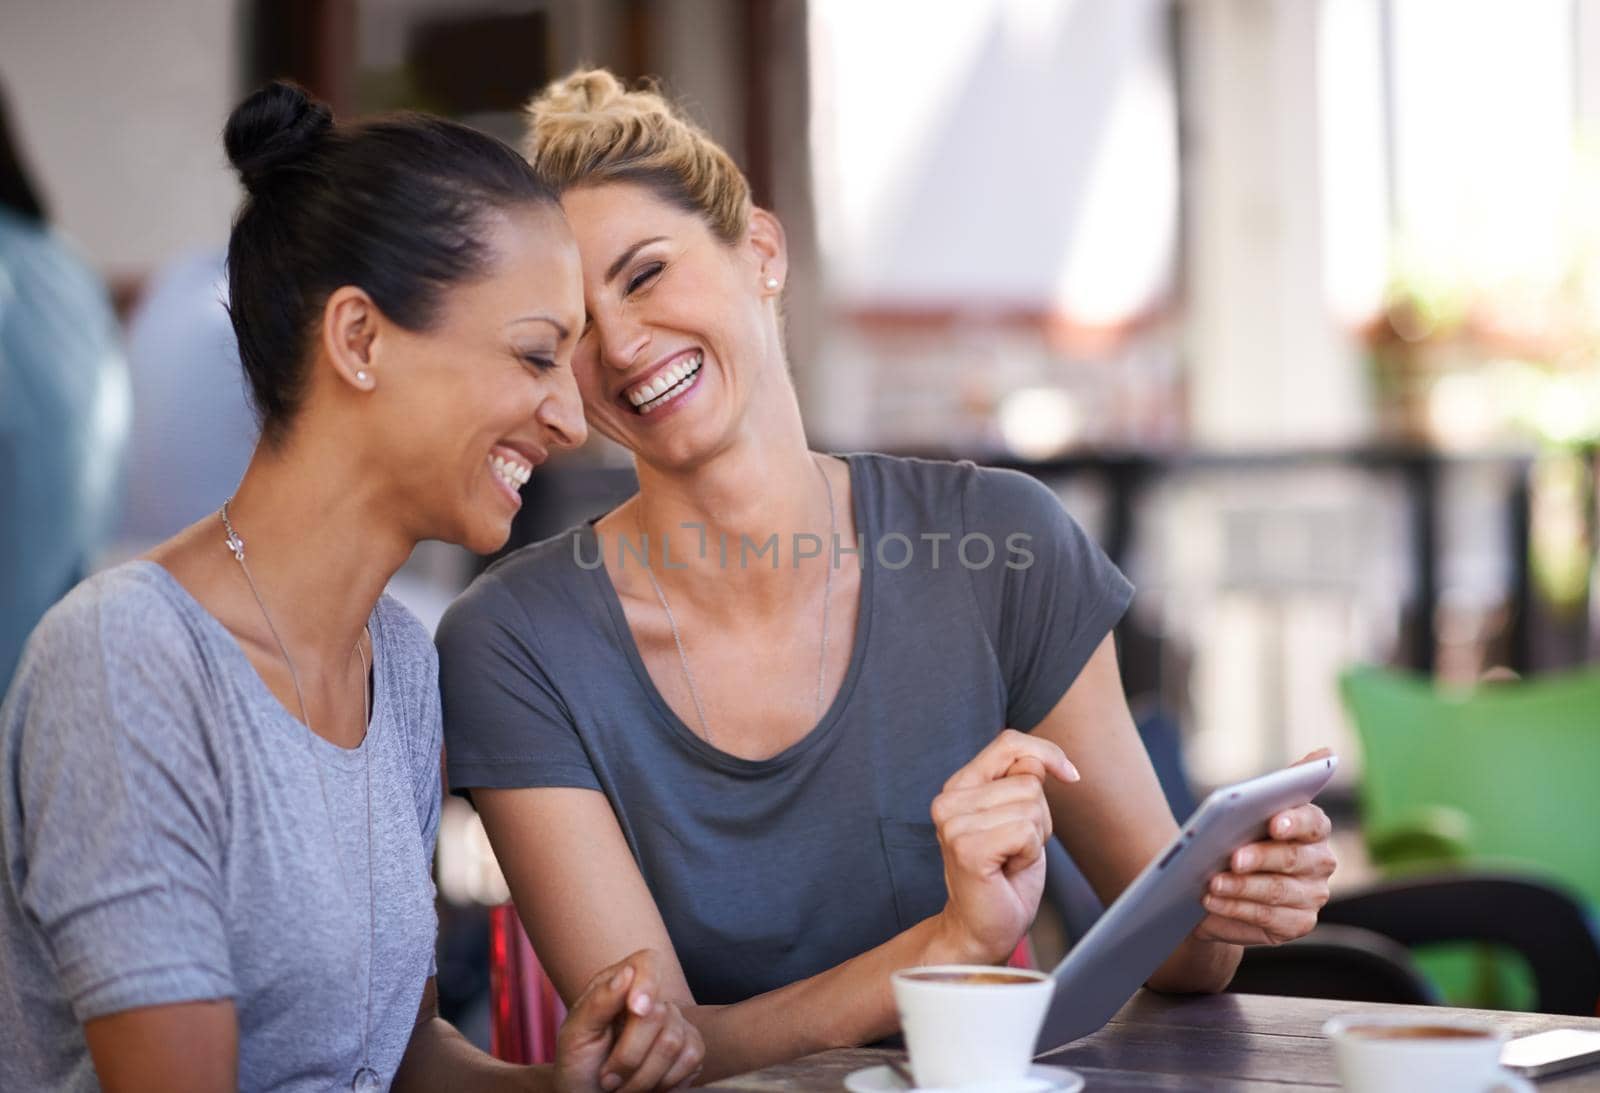 Technology brings people closer. Two young women looking at a tablet in a coffee shop